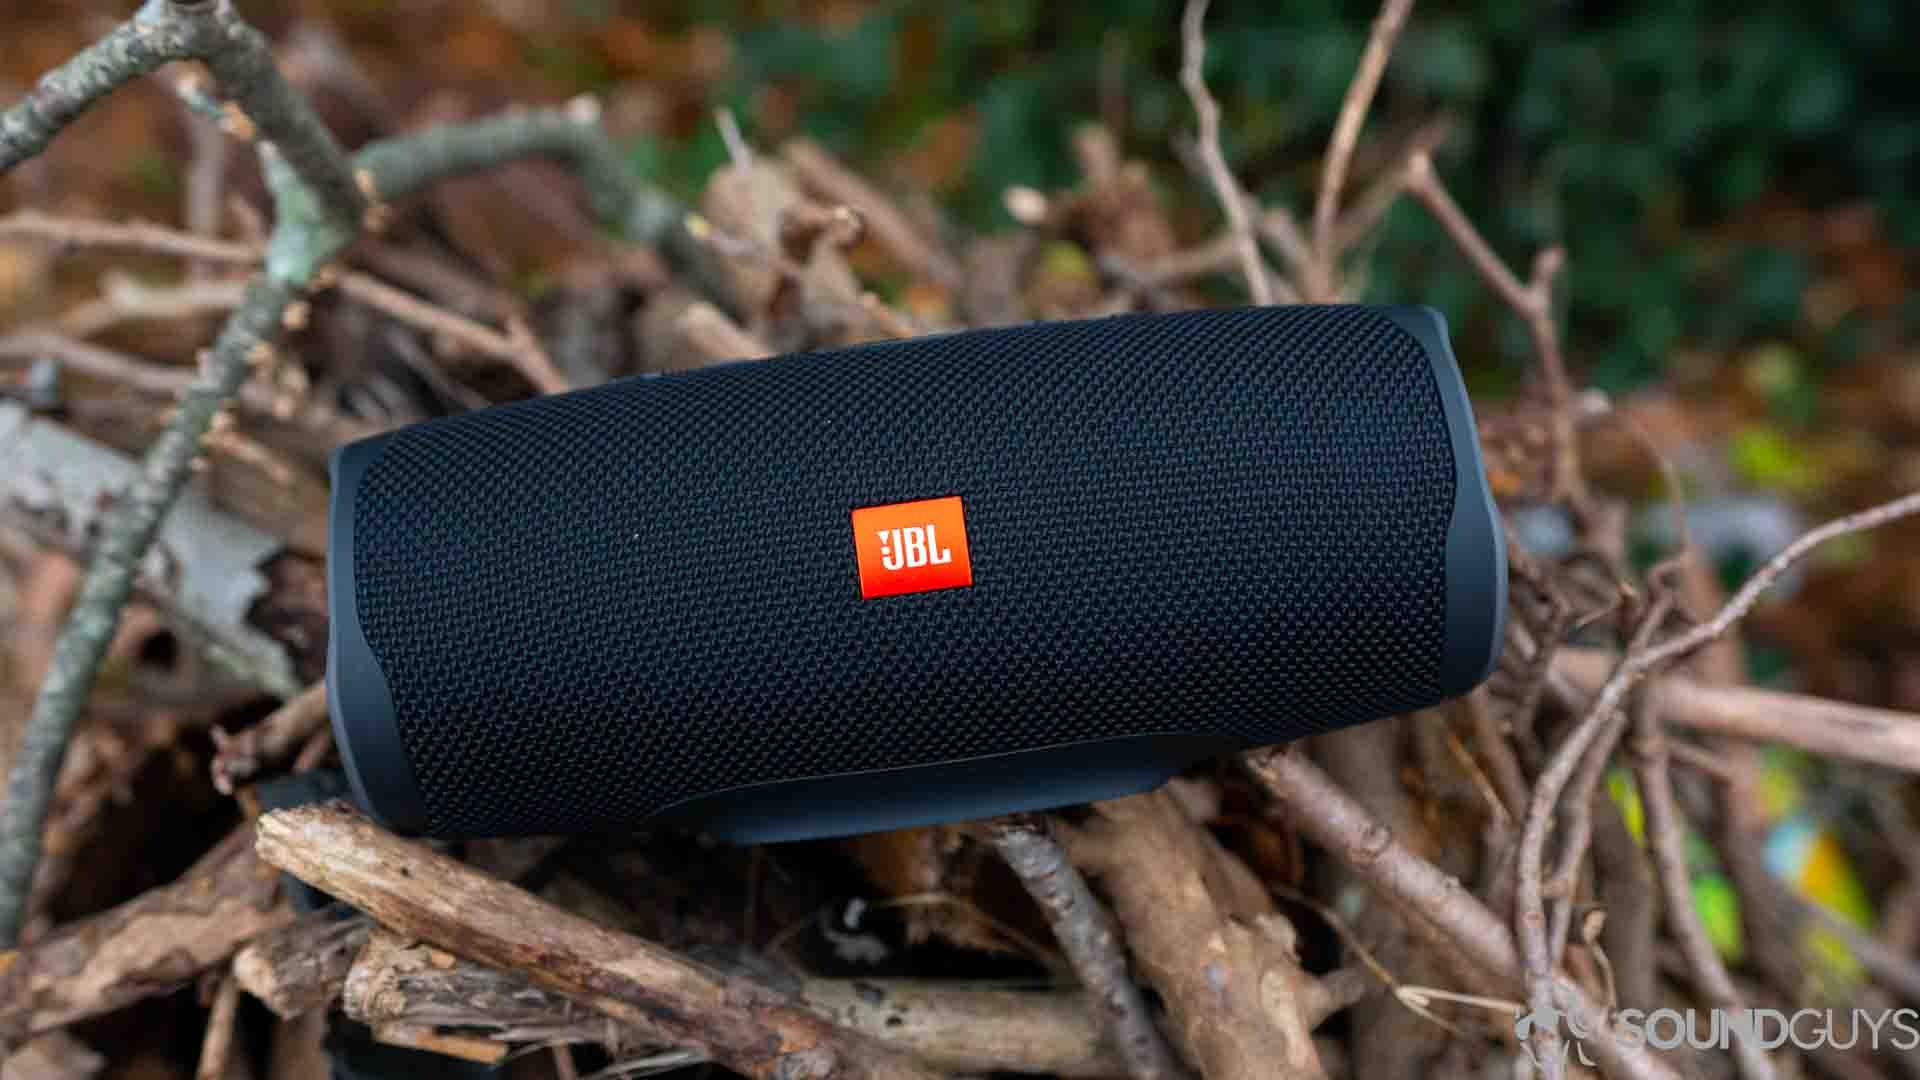 dozijn traagheid Sentimenteel JBL Charge 4 review: Worth the money, kind of - SoundGuys